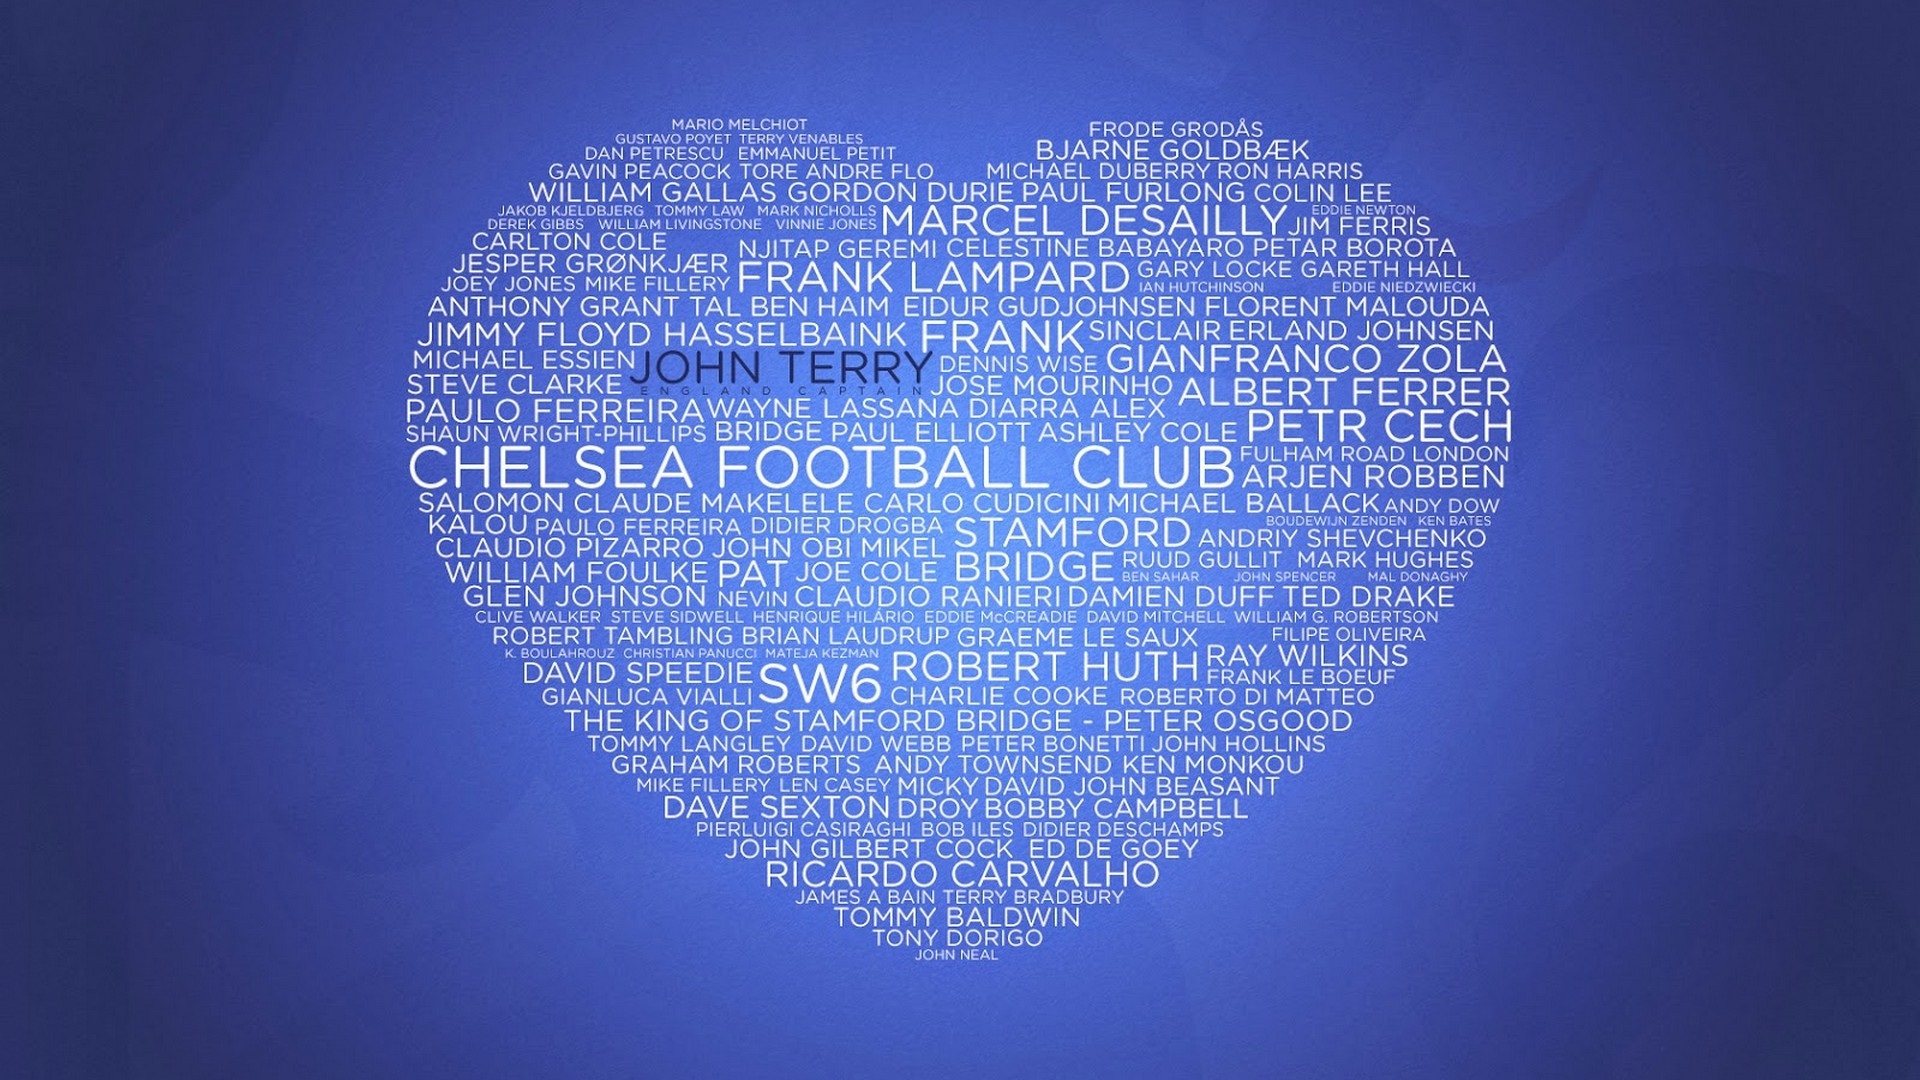 Wallpapers HD Chelsea Football Club With Resolution 1920X1080 pixel. You can make this wallpaper for your Mac or Windows Desktop Background, iPhone, Android or Tablet and another Smartphone device for free